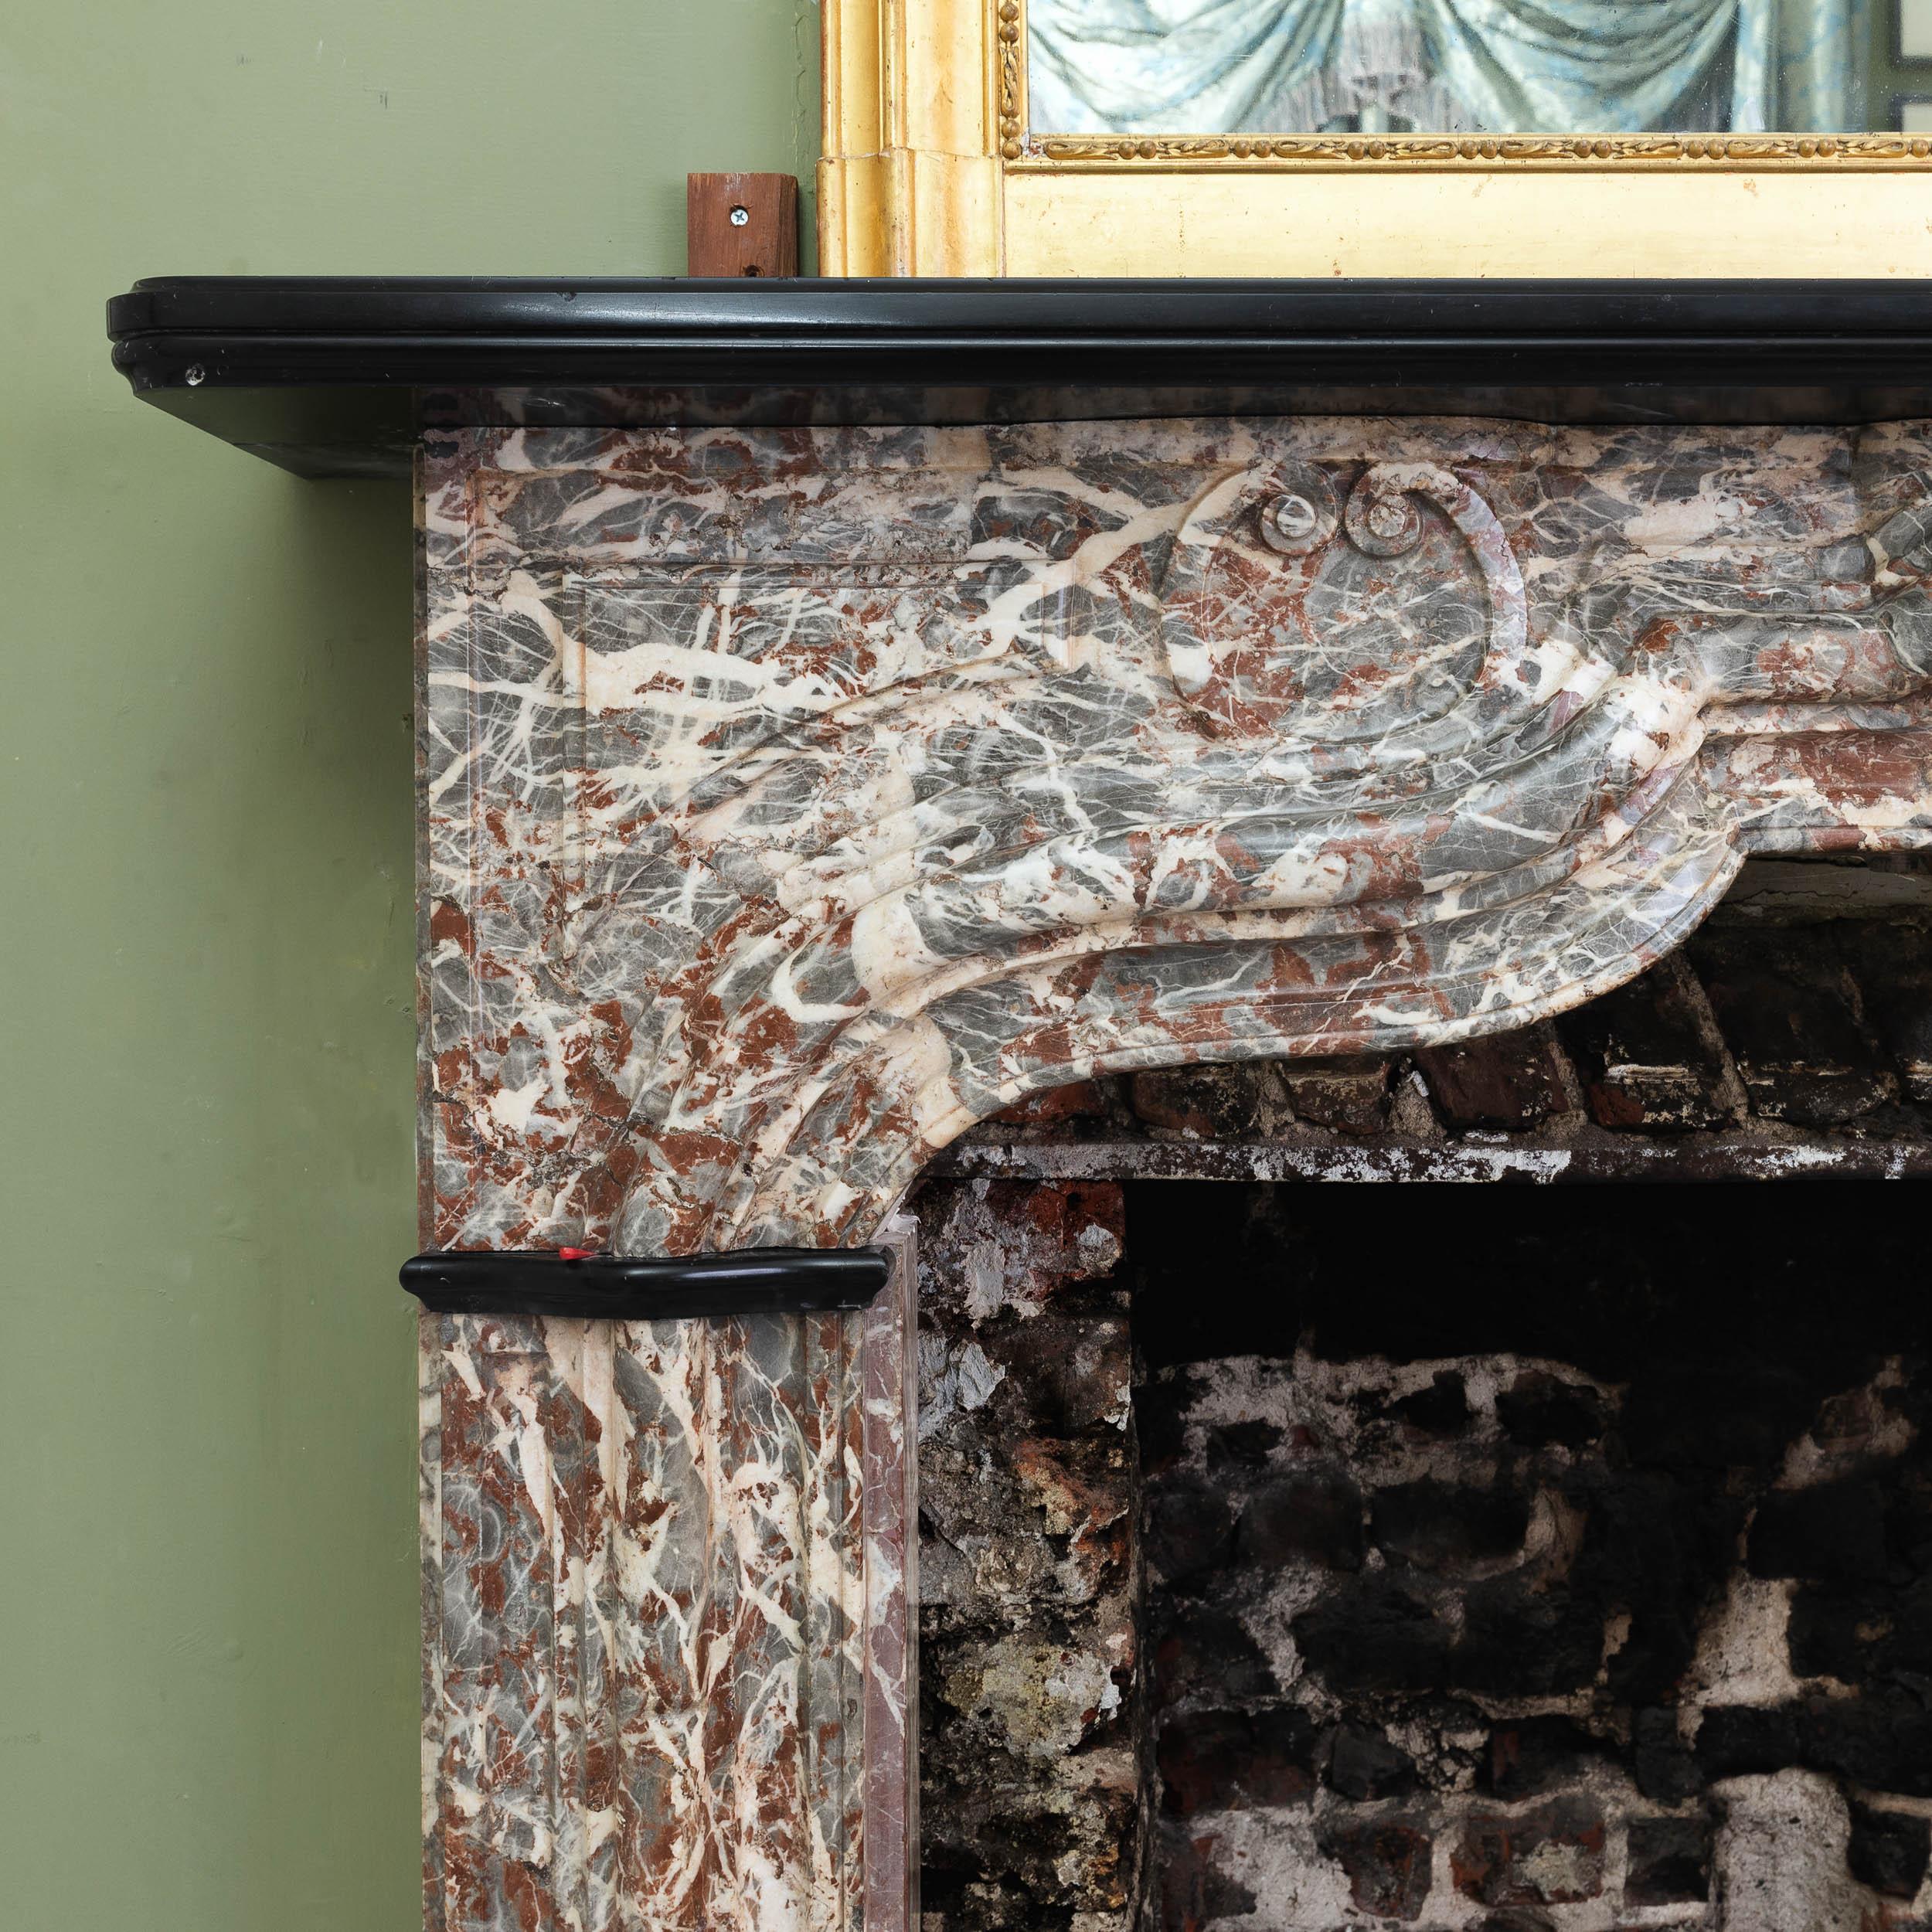 An early eighteenth century French Rance marble fireplace - a transitional Louis XIV/Louis XV surround - the moulded Belgian Black marble shelf above boldly shaped and moulded frieze with panelled spandrels.

Dimensions:	134.5cm (53